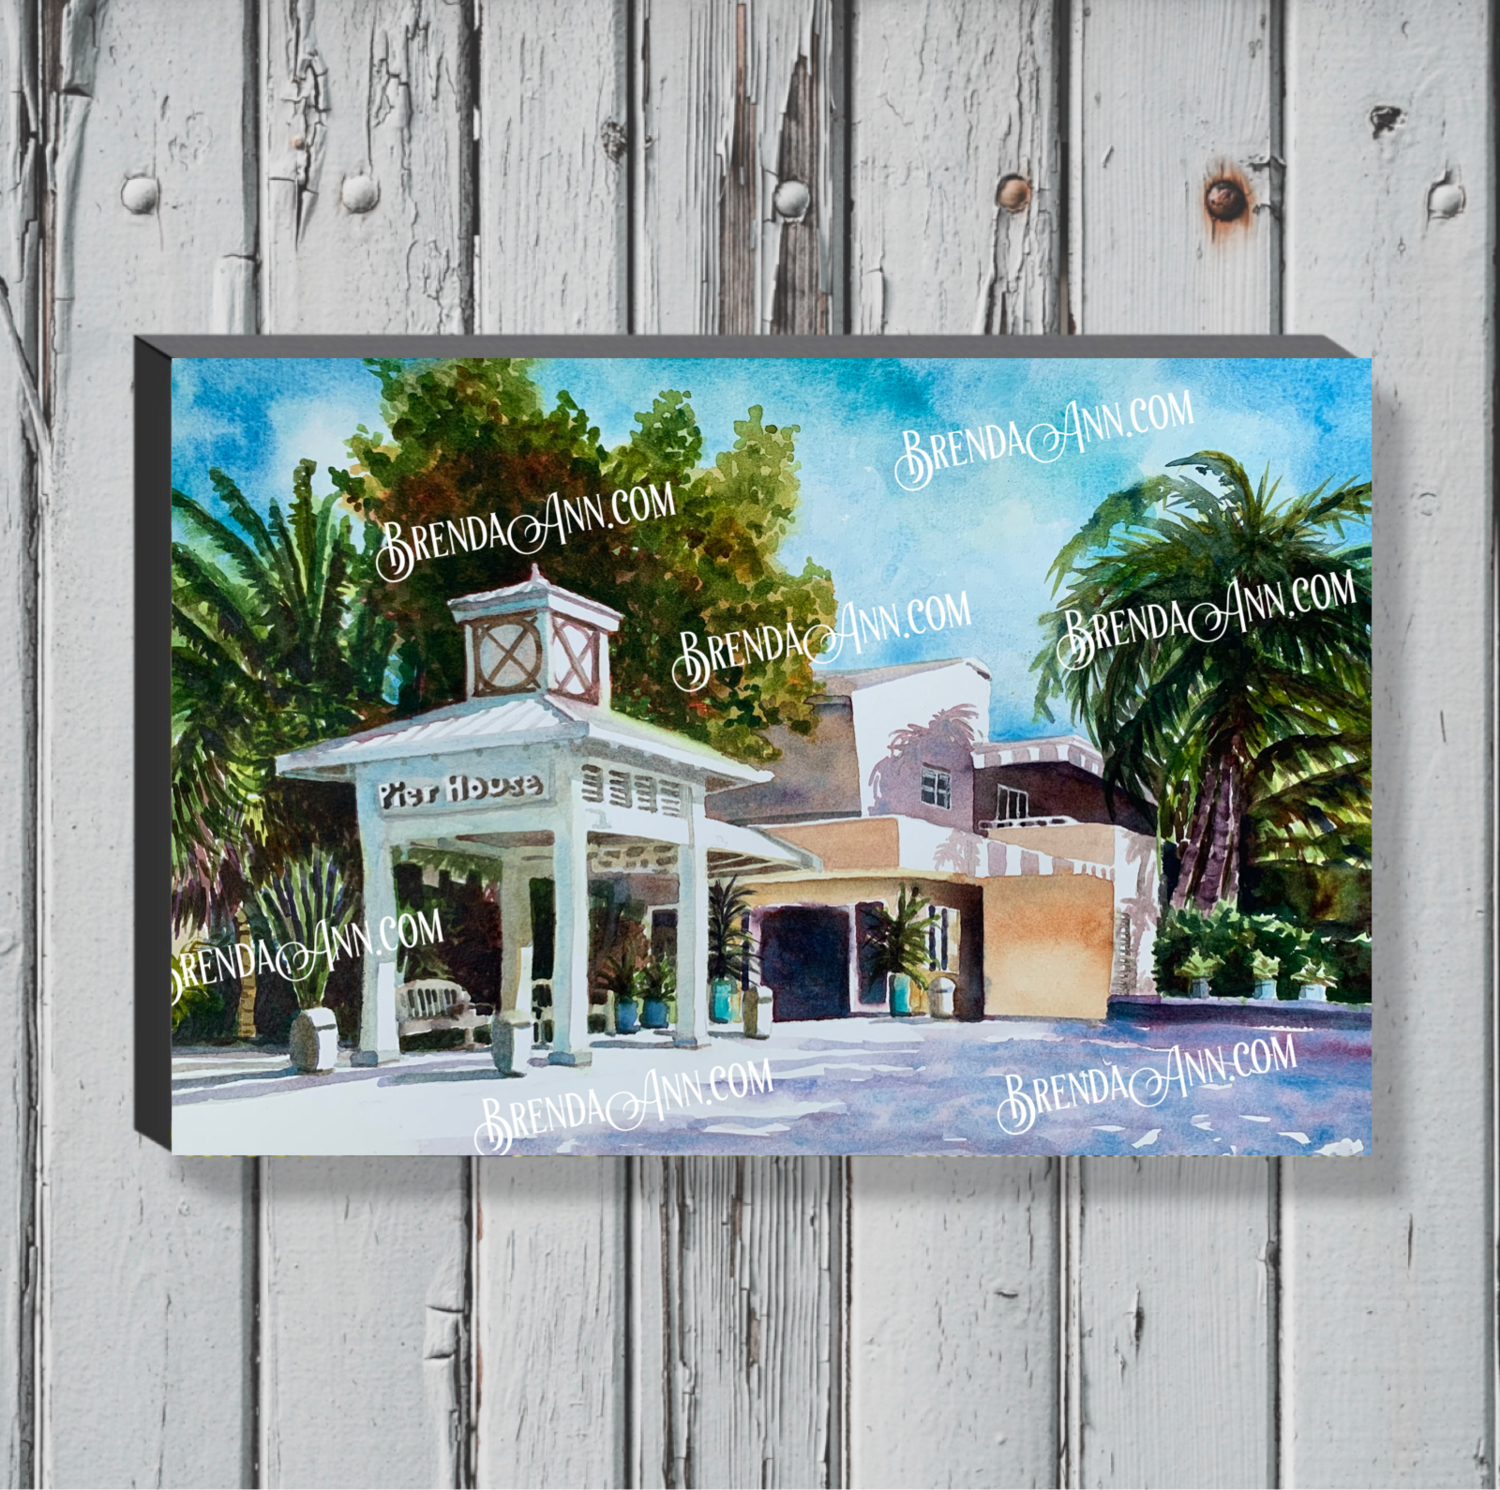 Key West Art - Pier House Resort & Spa Canvas Gallery Wrapped Print